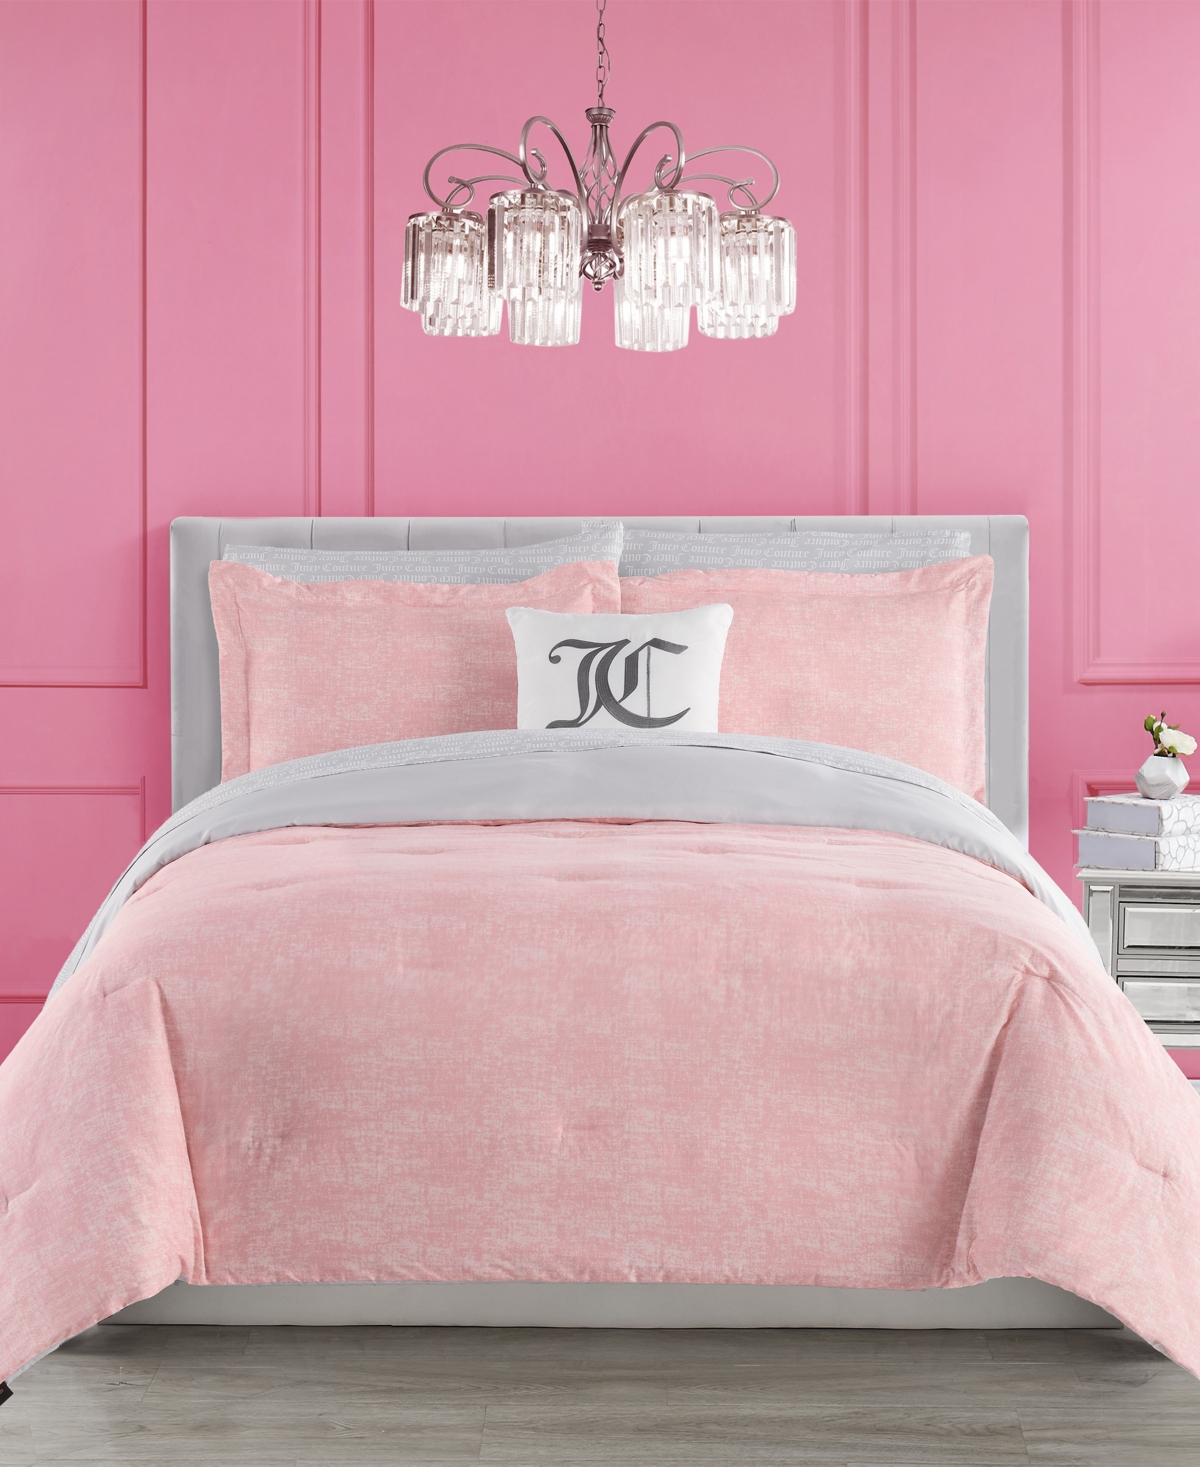 Juicy Couture Texture 6-pc. Comforter Set, Twin In Pink,gray